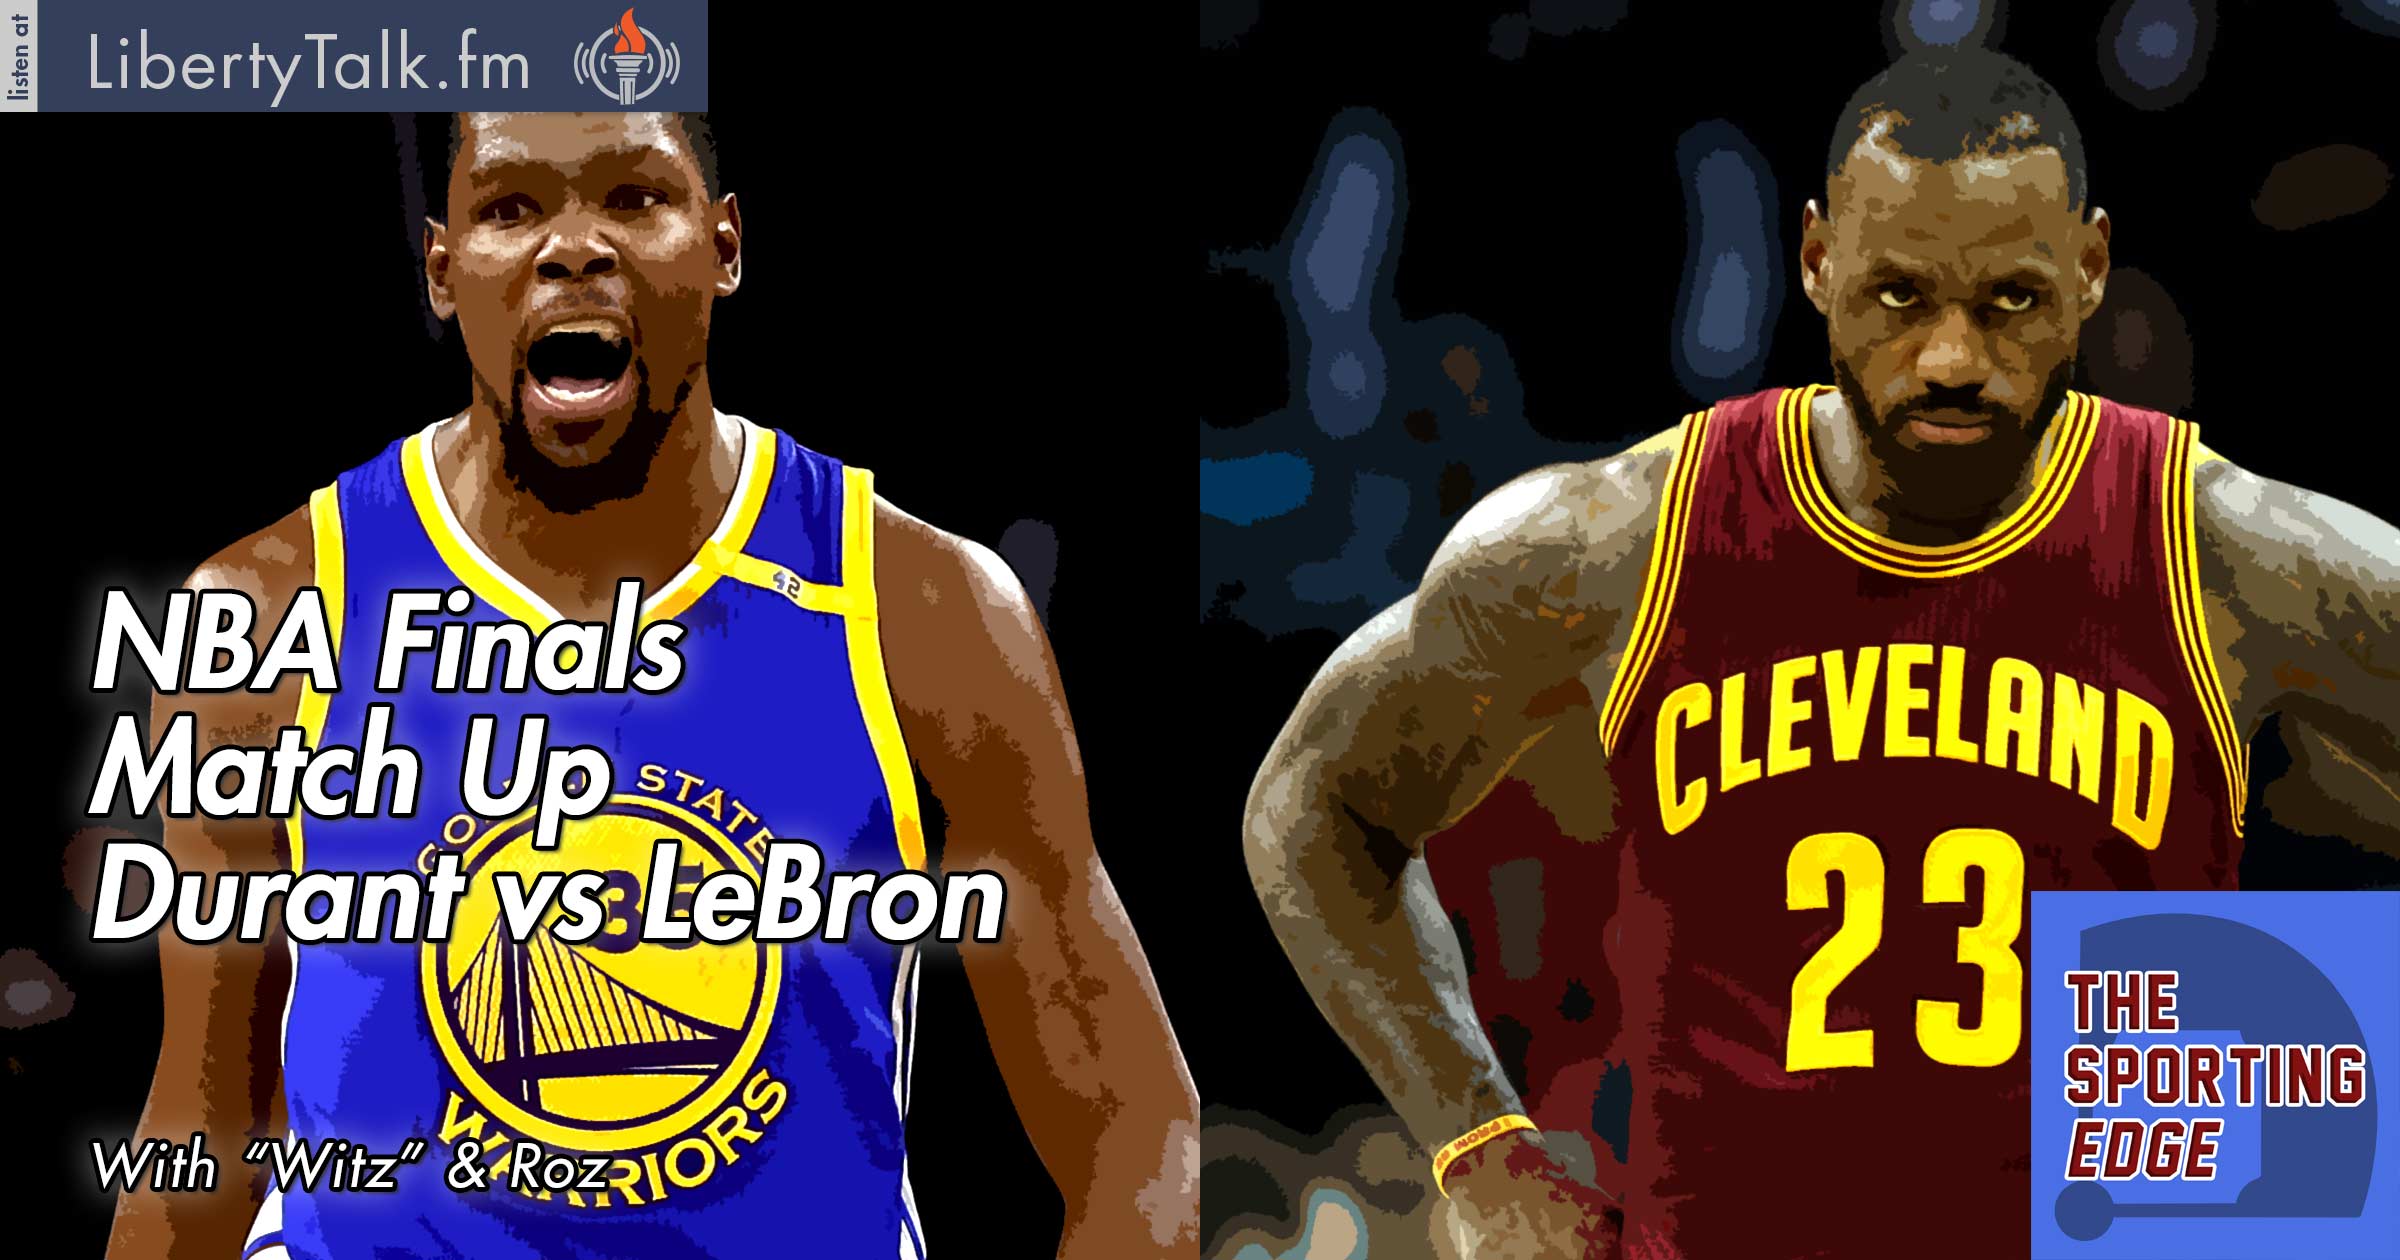 NBA Finals Match Up Durant vs LeBron - The Sporting Edge